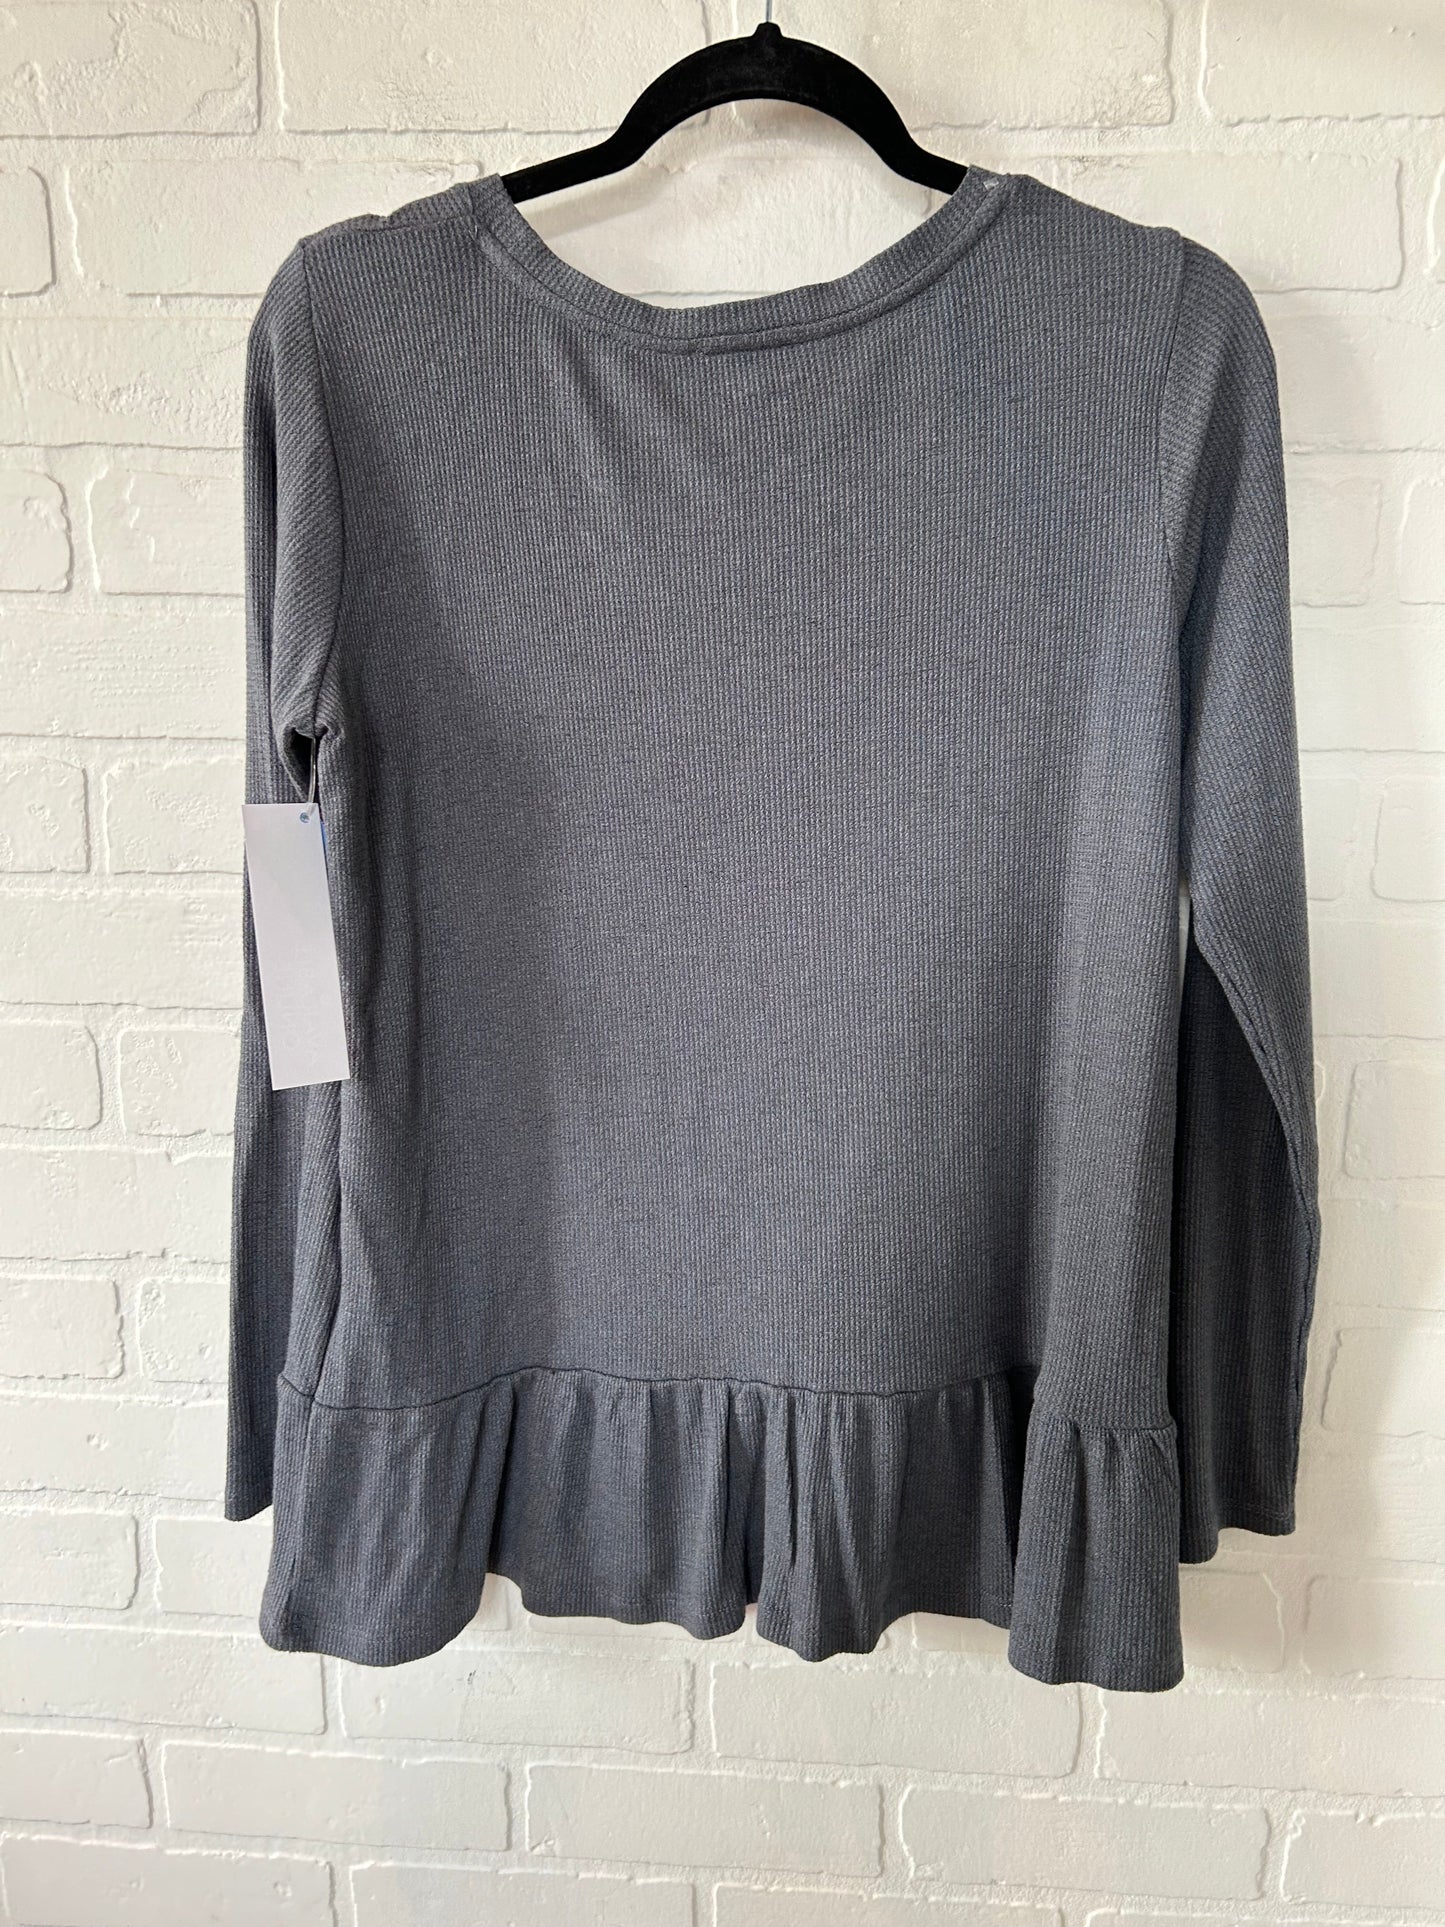 Grey Top Long Sleeve Jane And Delancey, Size S